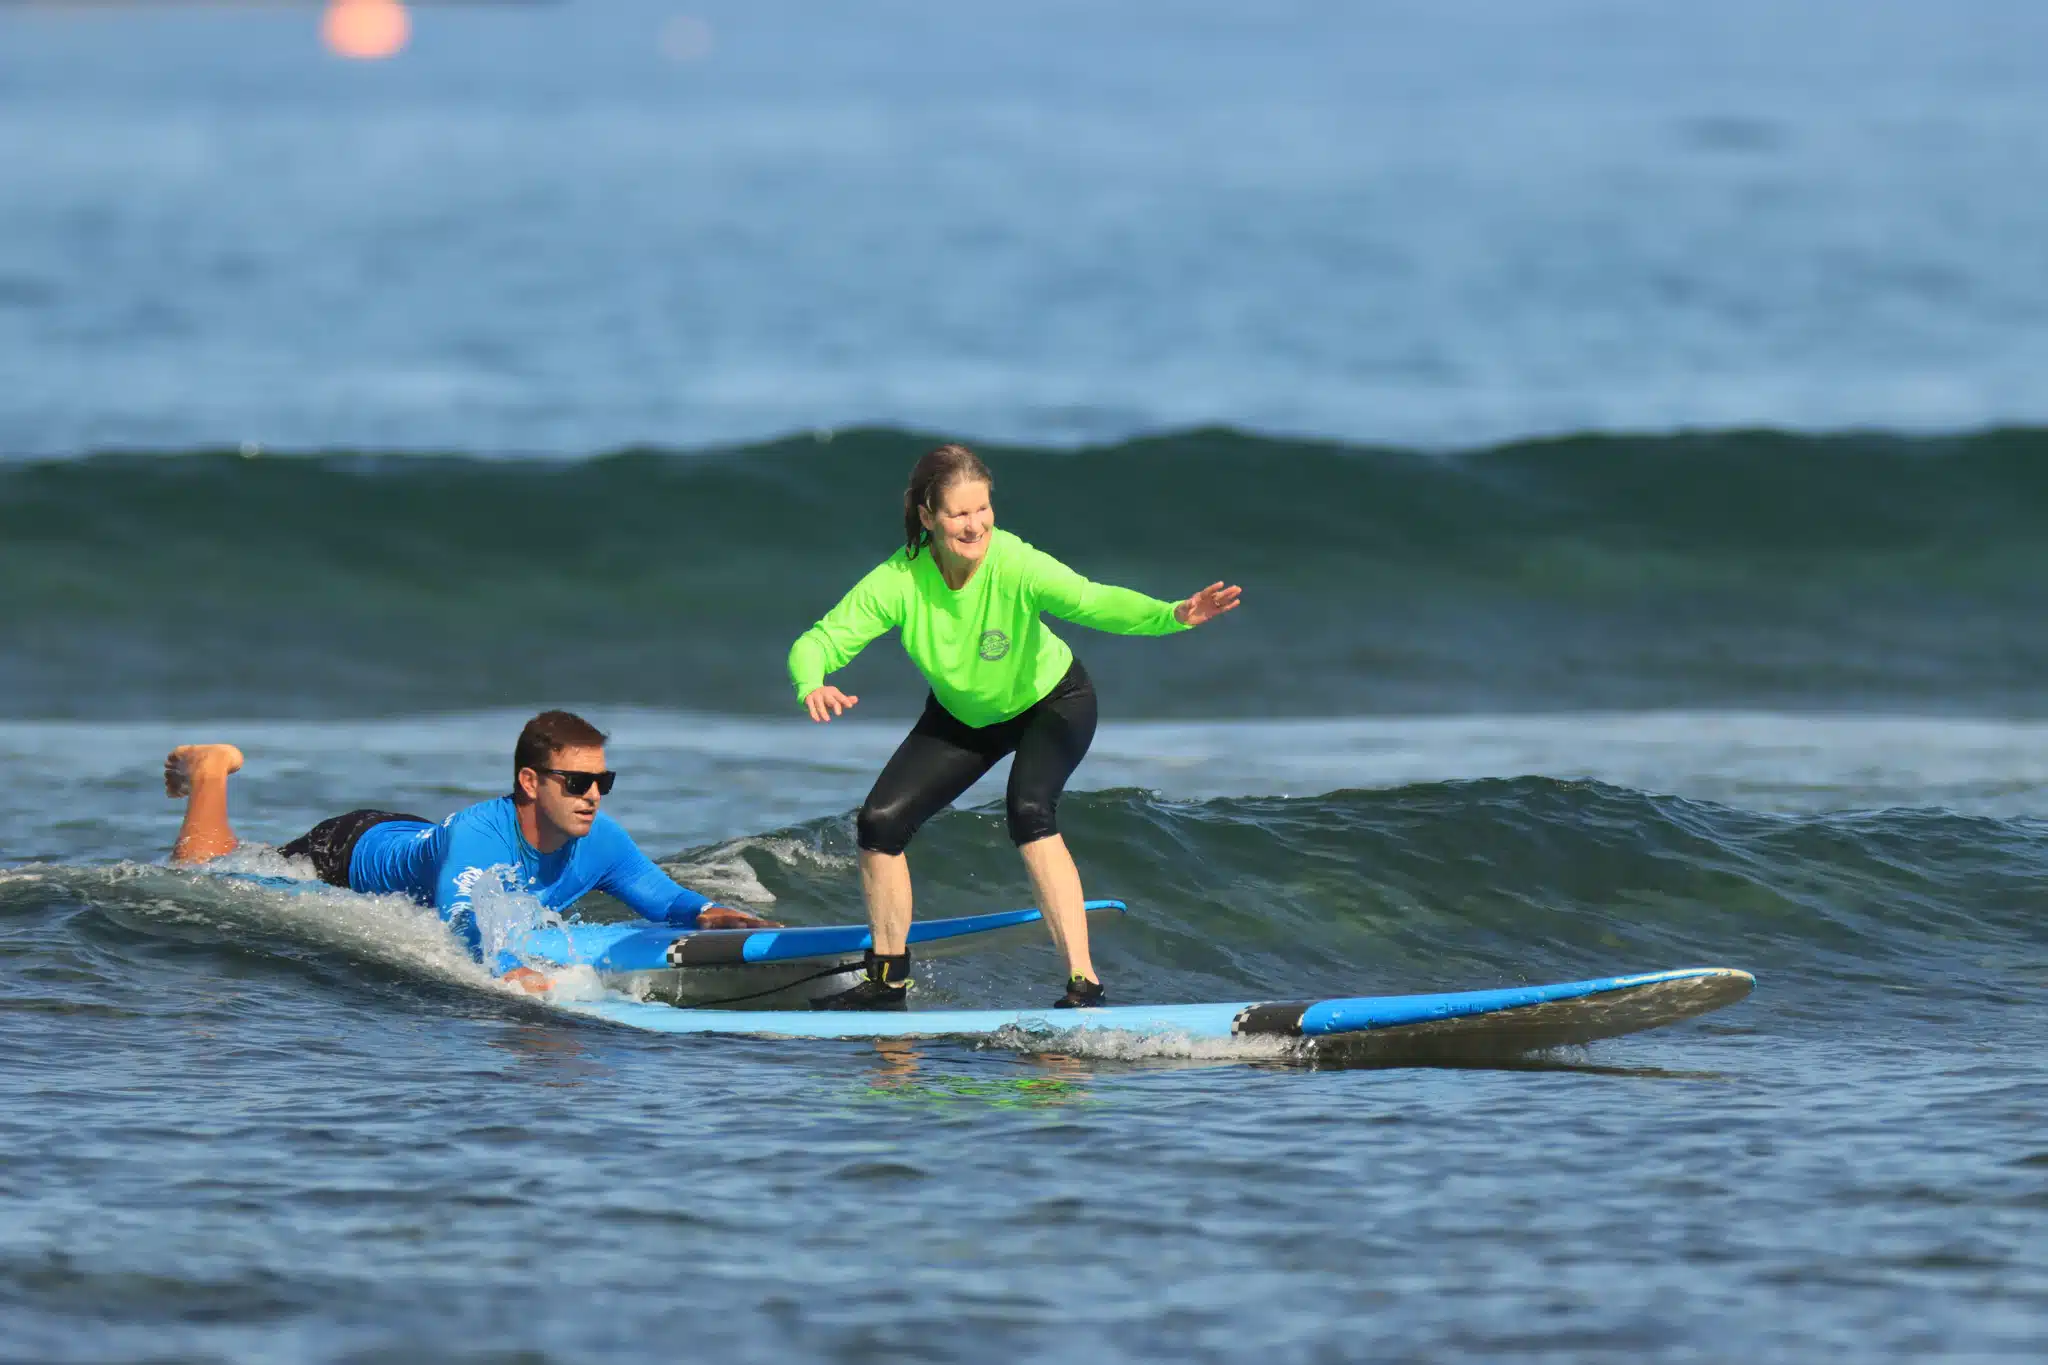 Group Surf Lesson is a Water Activity located in the city of Lahaina on Maui, Hawaii